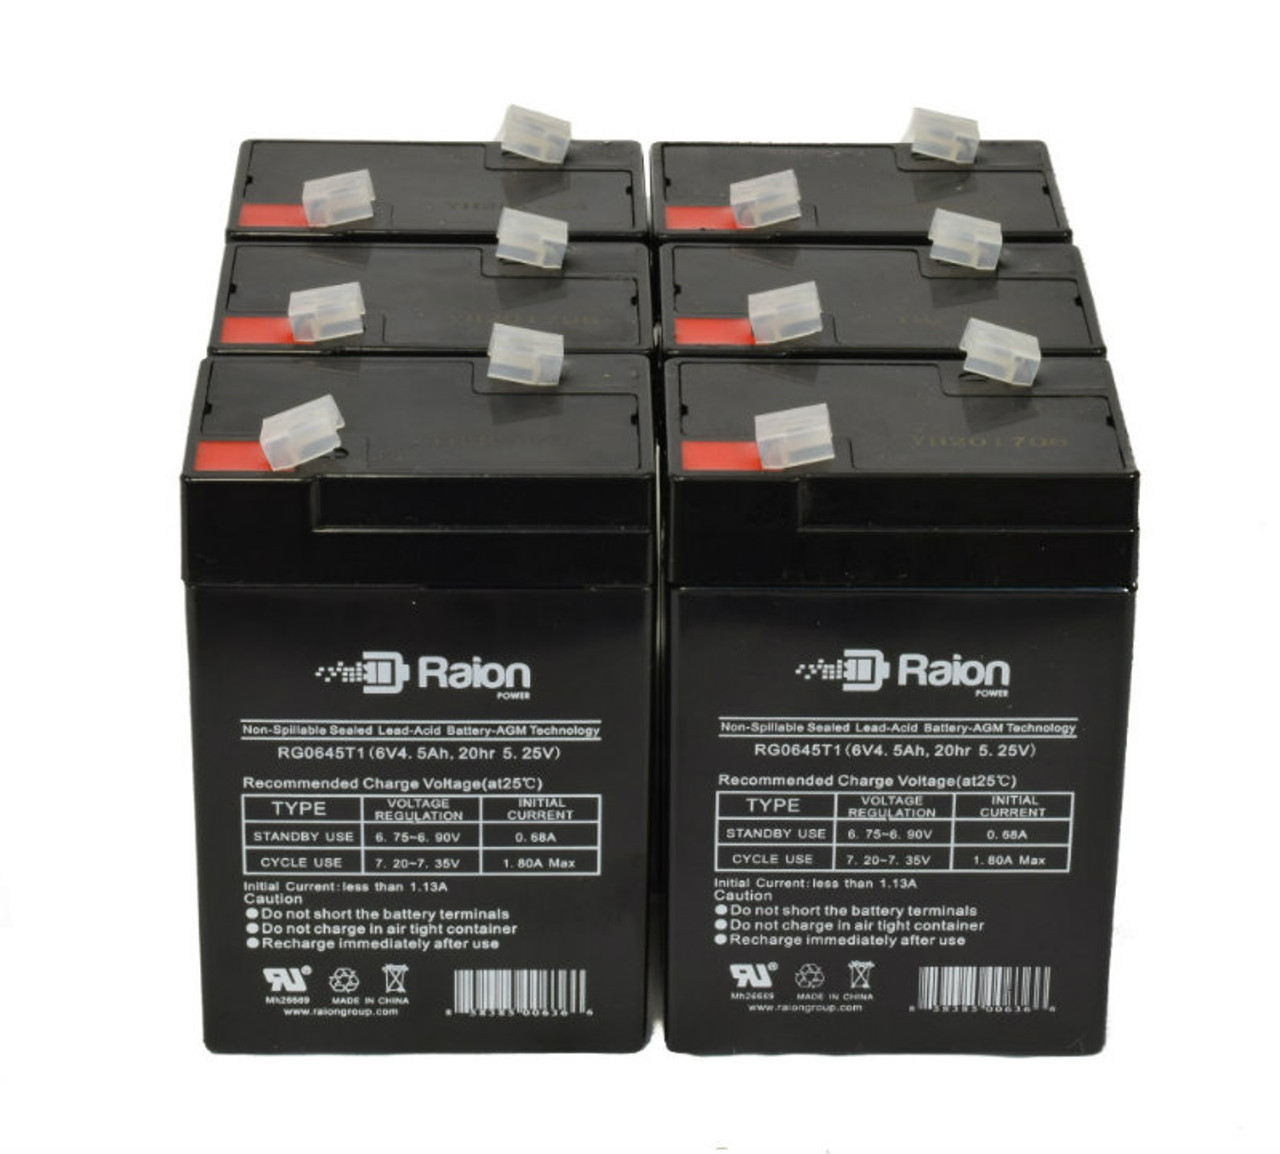 Raion Power 6V 4.5Ah Replacement Emergency Light Battery for Hubbell 0120255 - 6 Pack